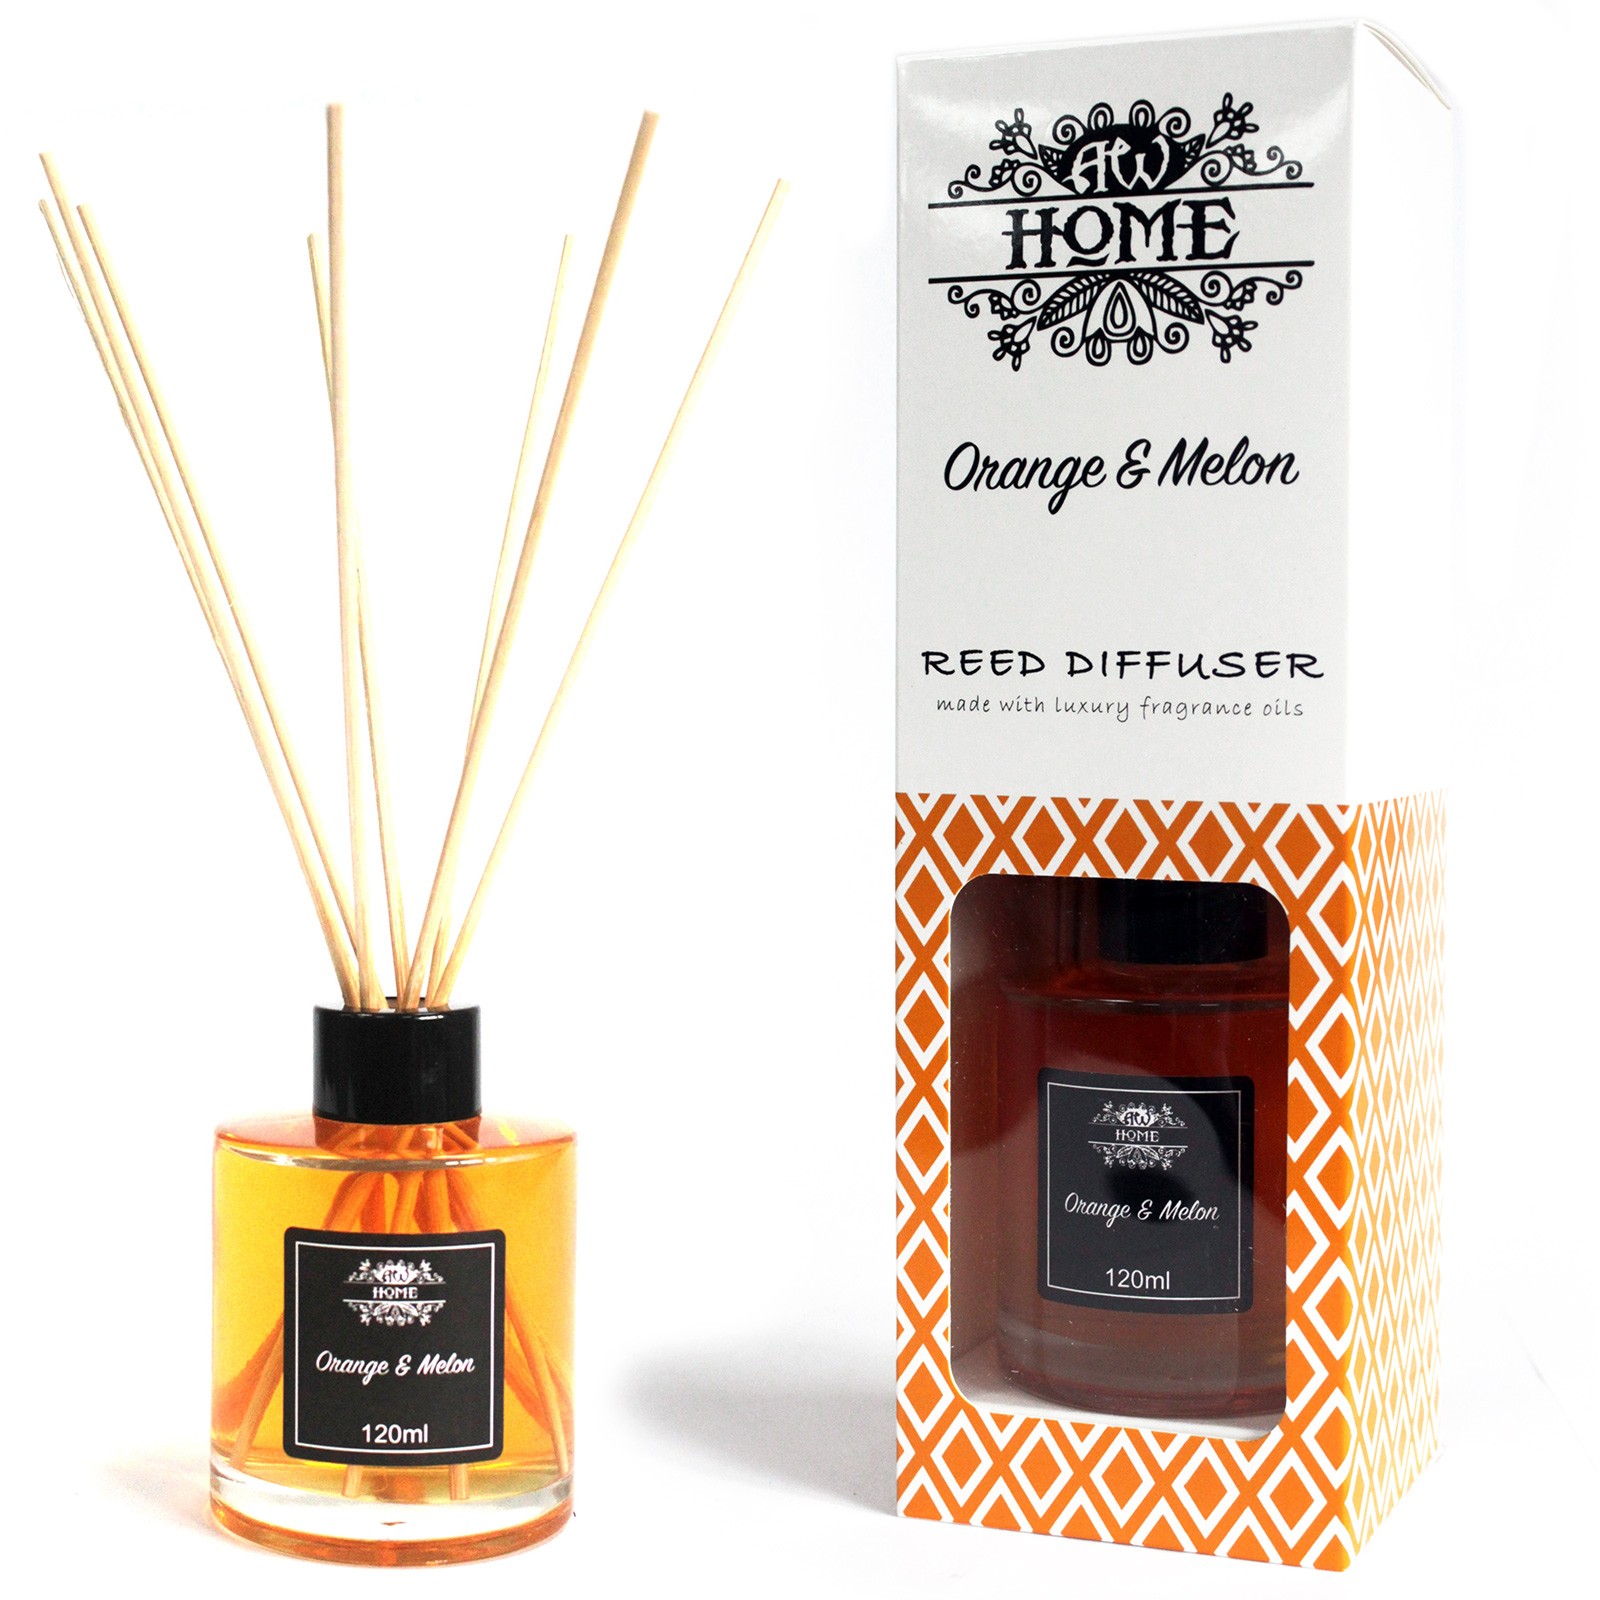 Orange & Melon - Home Fragrance Reed Diffuser - 120ml With Reeds